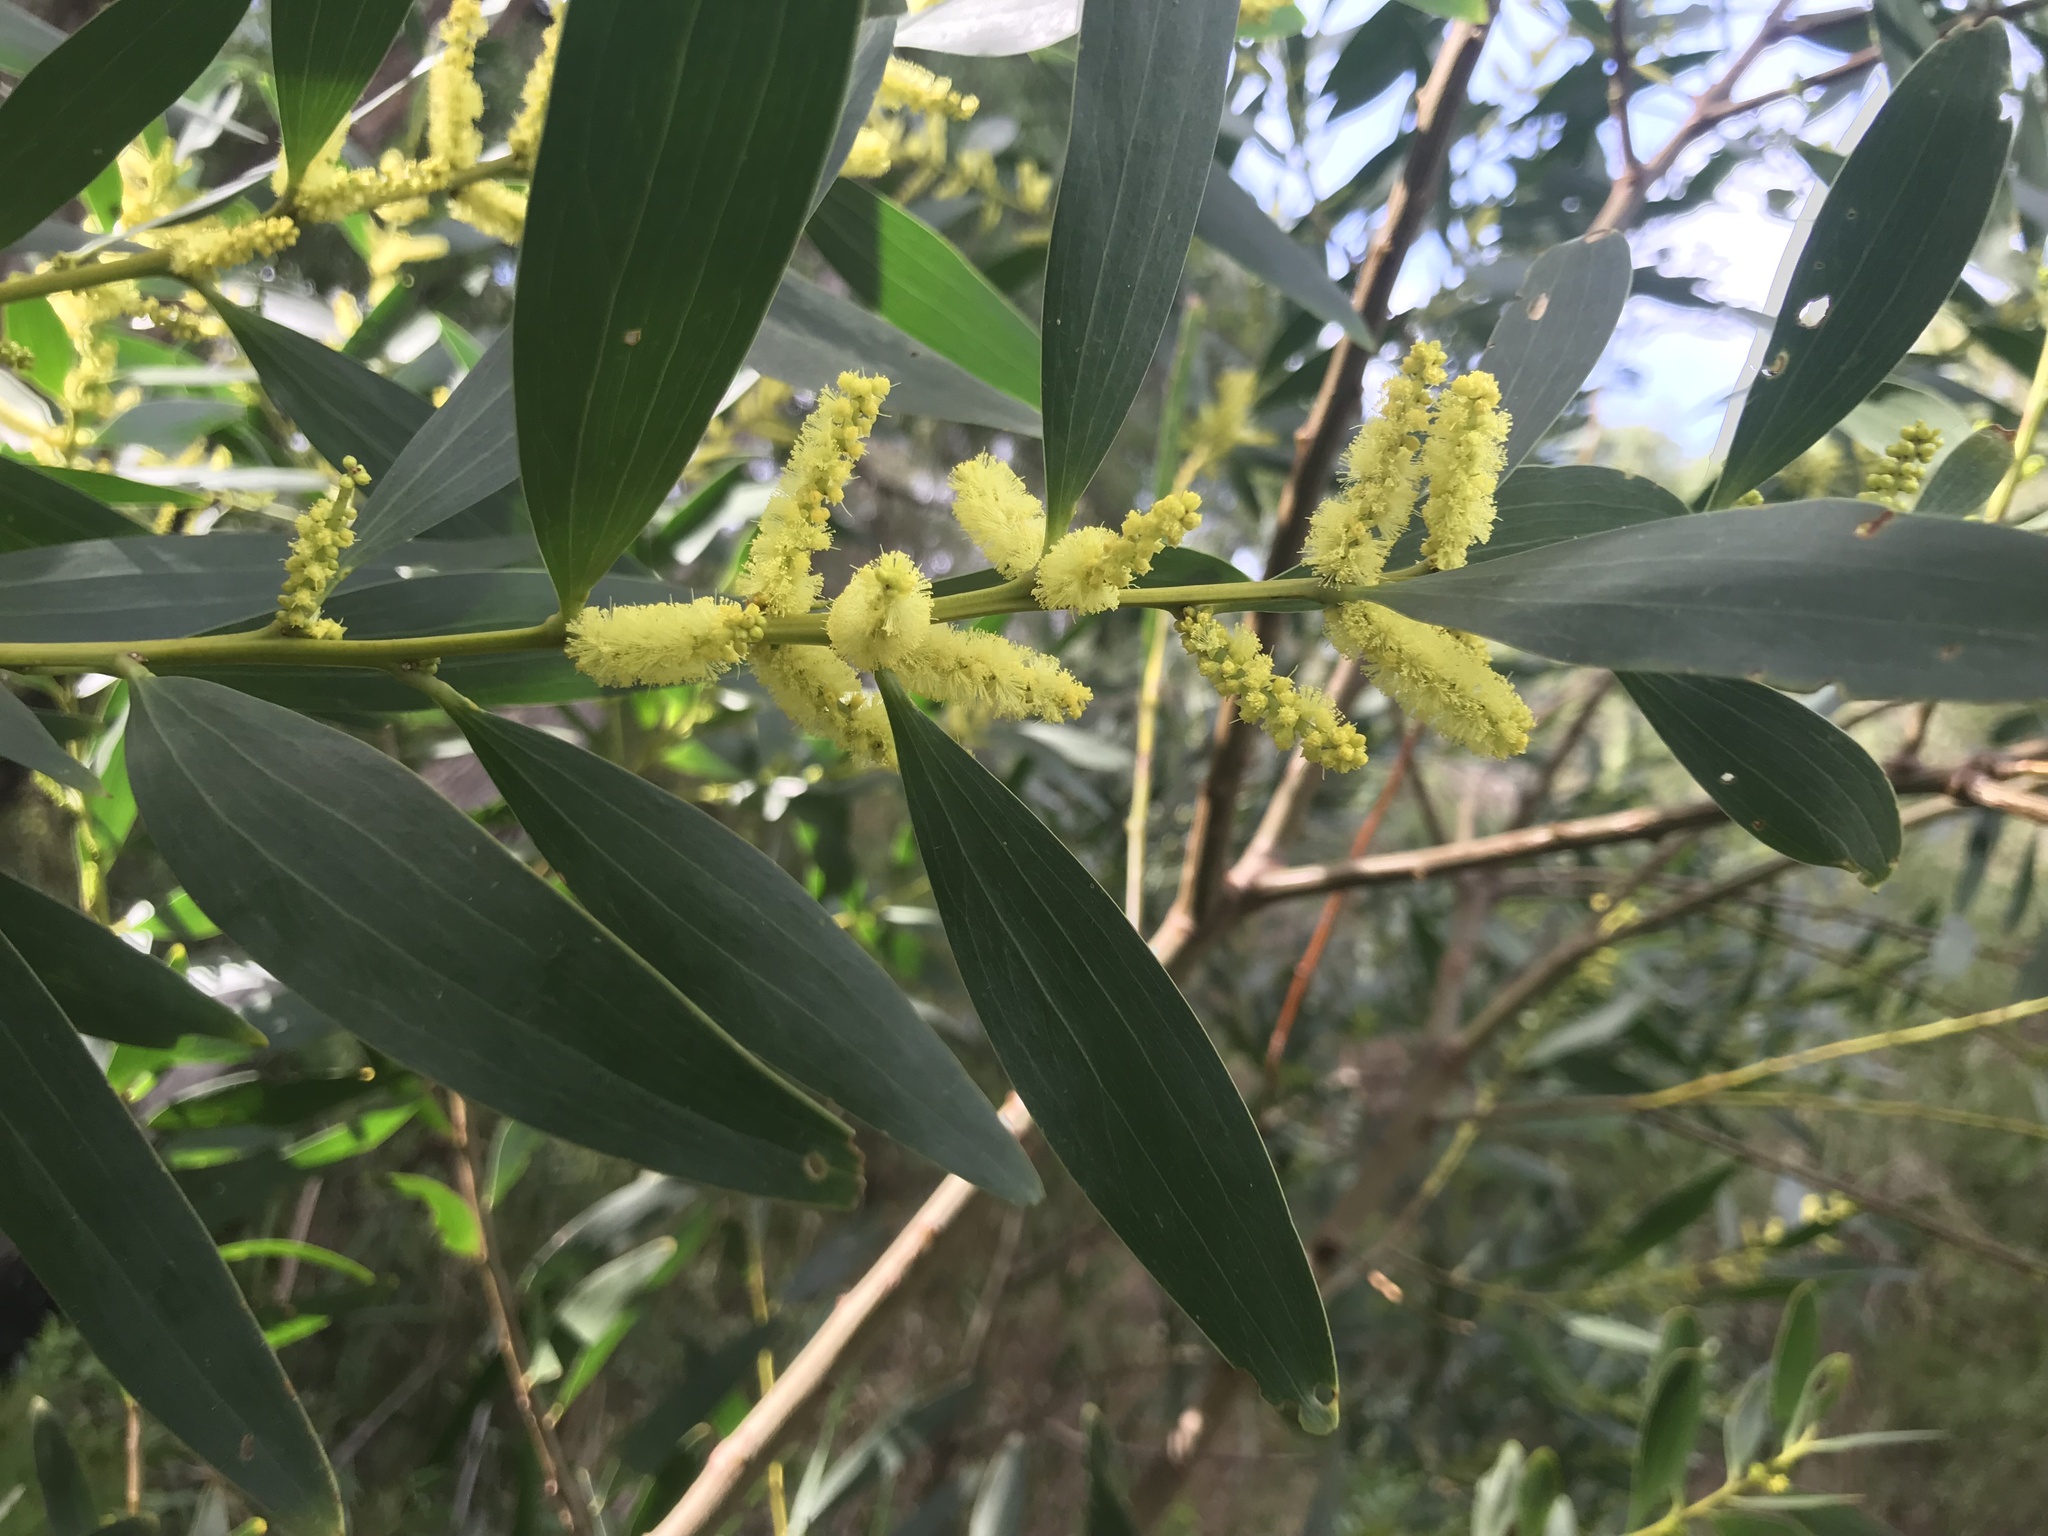 Grey green leaves and yellow flower spikes of Sydney Golden Wattle.